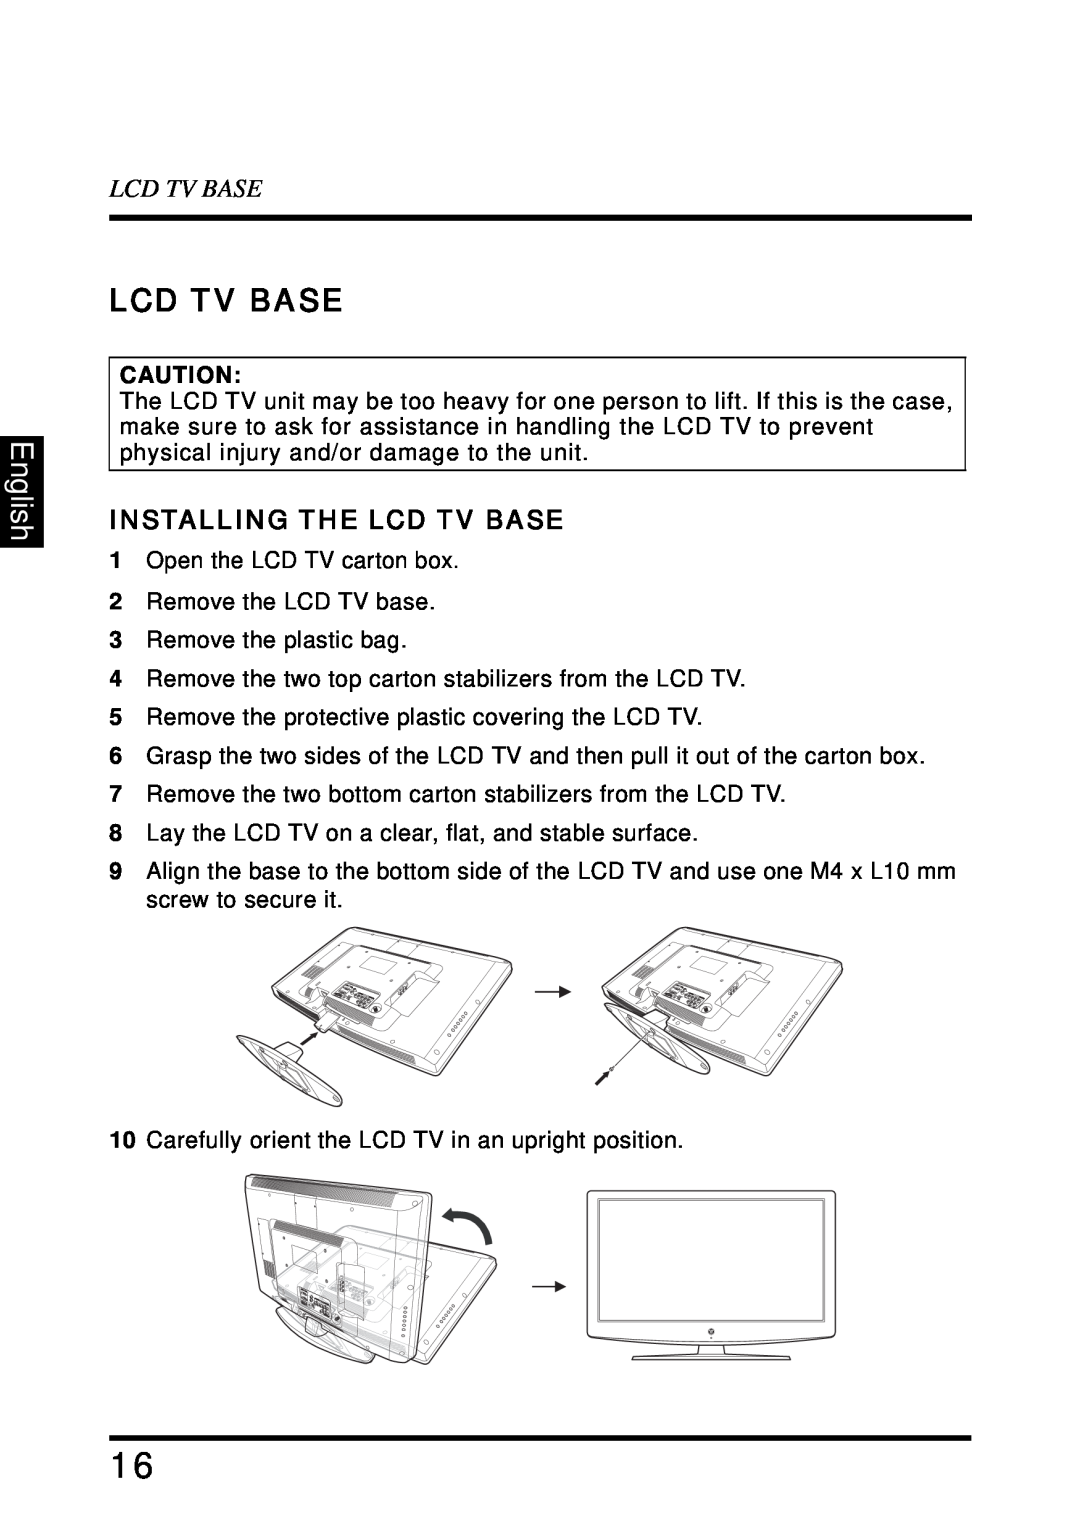 Westinghouse SK-32H640G user manual English, Installing The Lcd Tv Base 